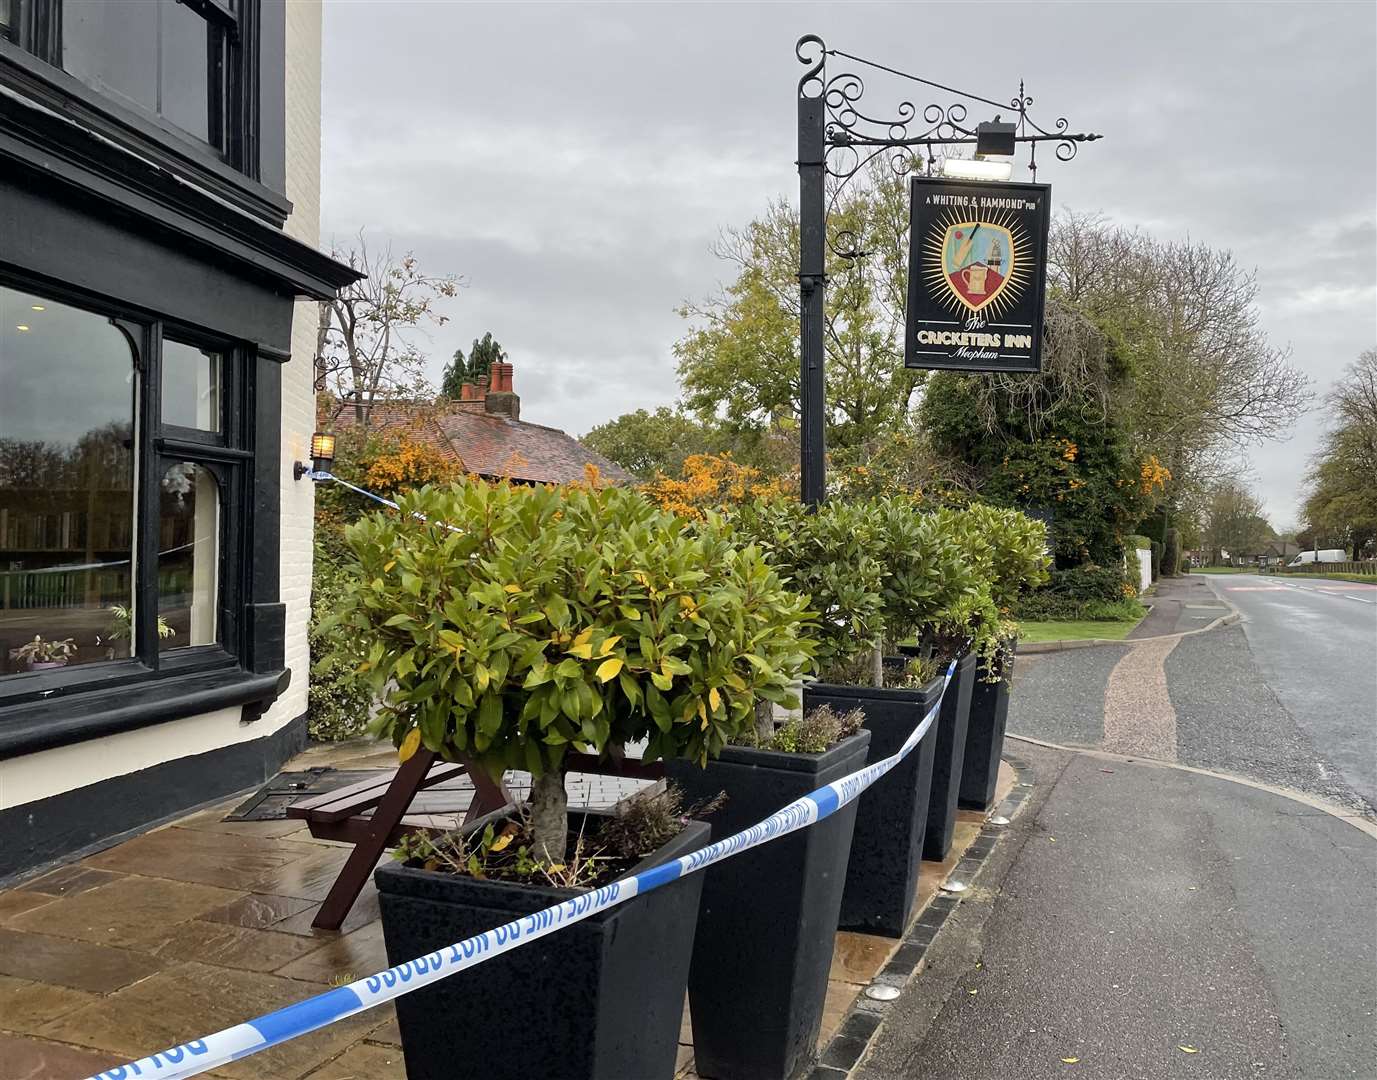 The owner has announced the pub will reopen today